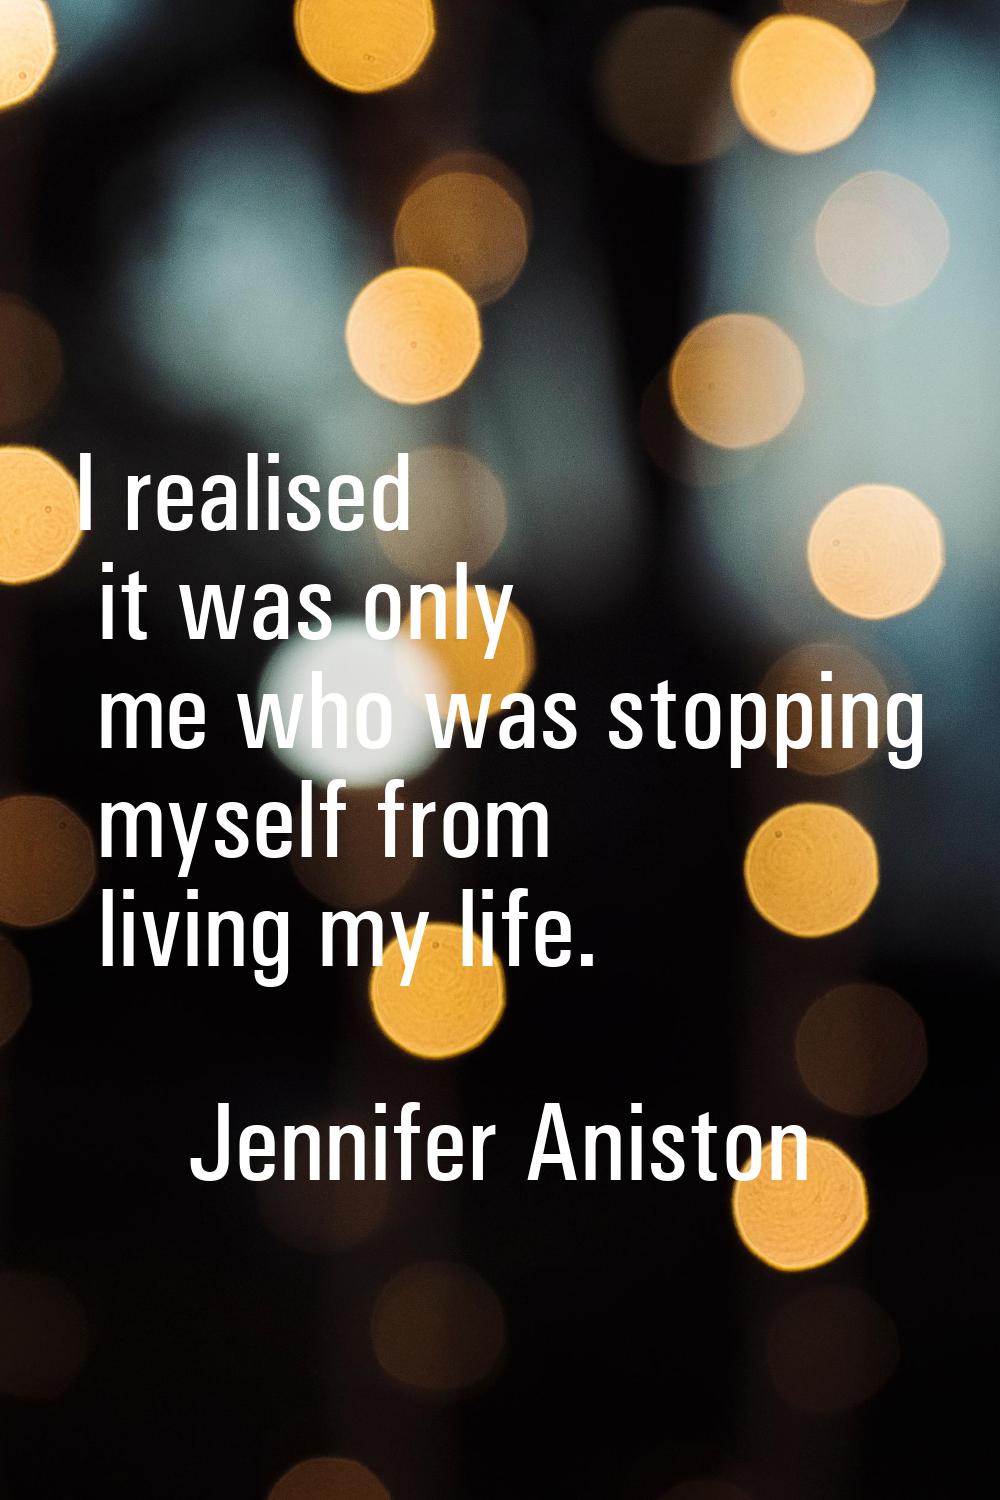 I realised it was only me who was stopping myself from living my life.